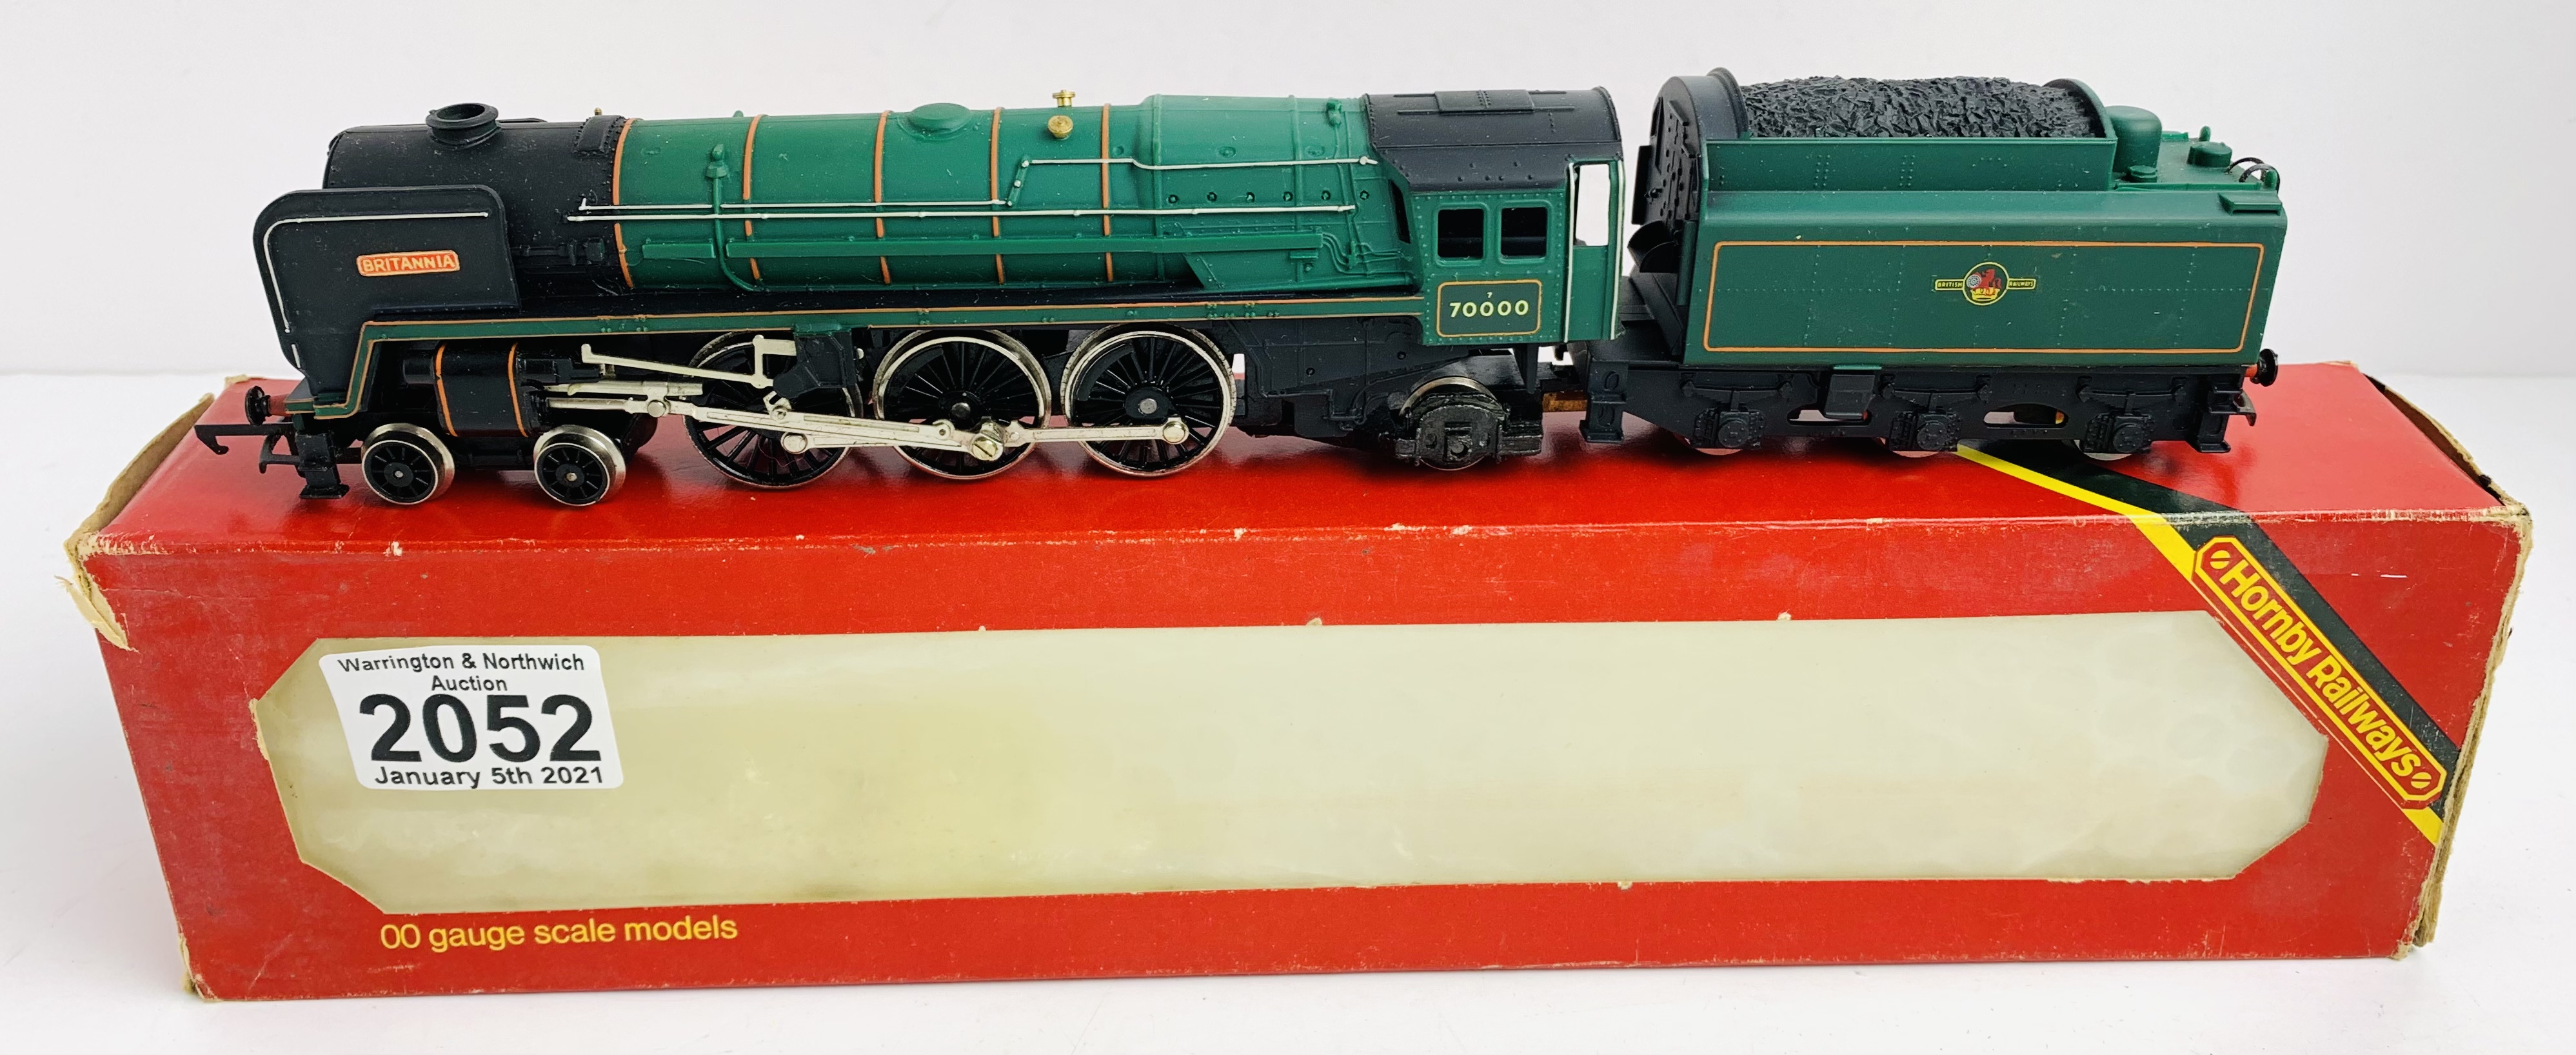 Hornby OO Gauge Britannia Locomotive Boxed P&P Group 1 (£14+VAT for the first lot and £1+VAT for